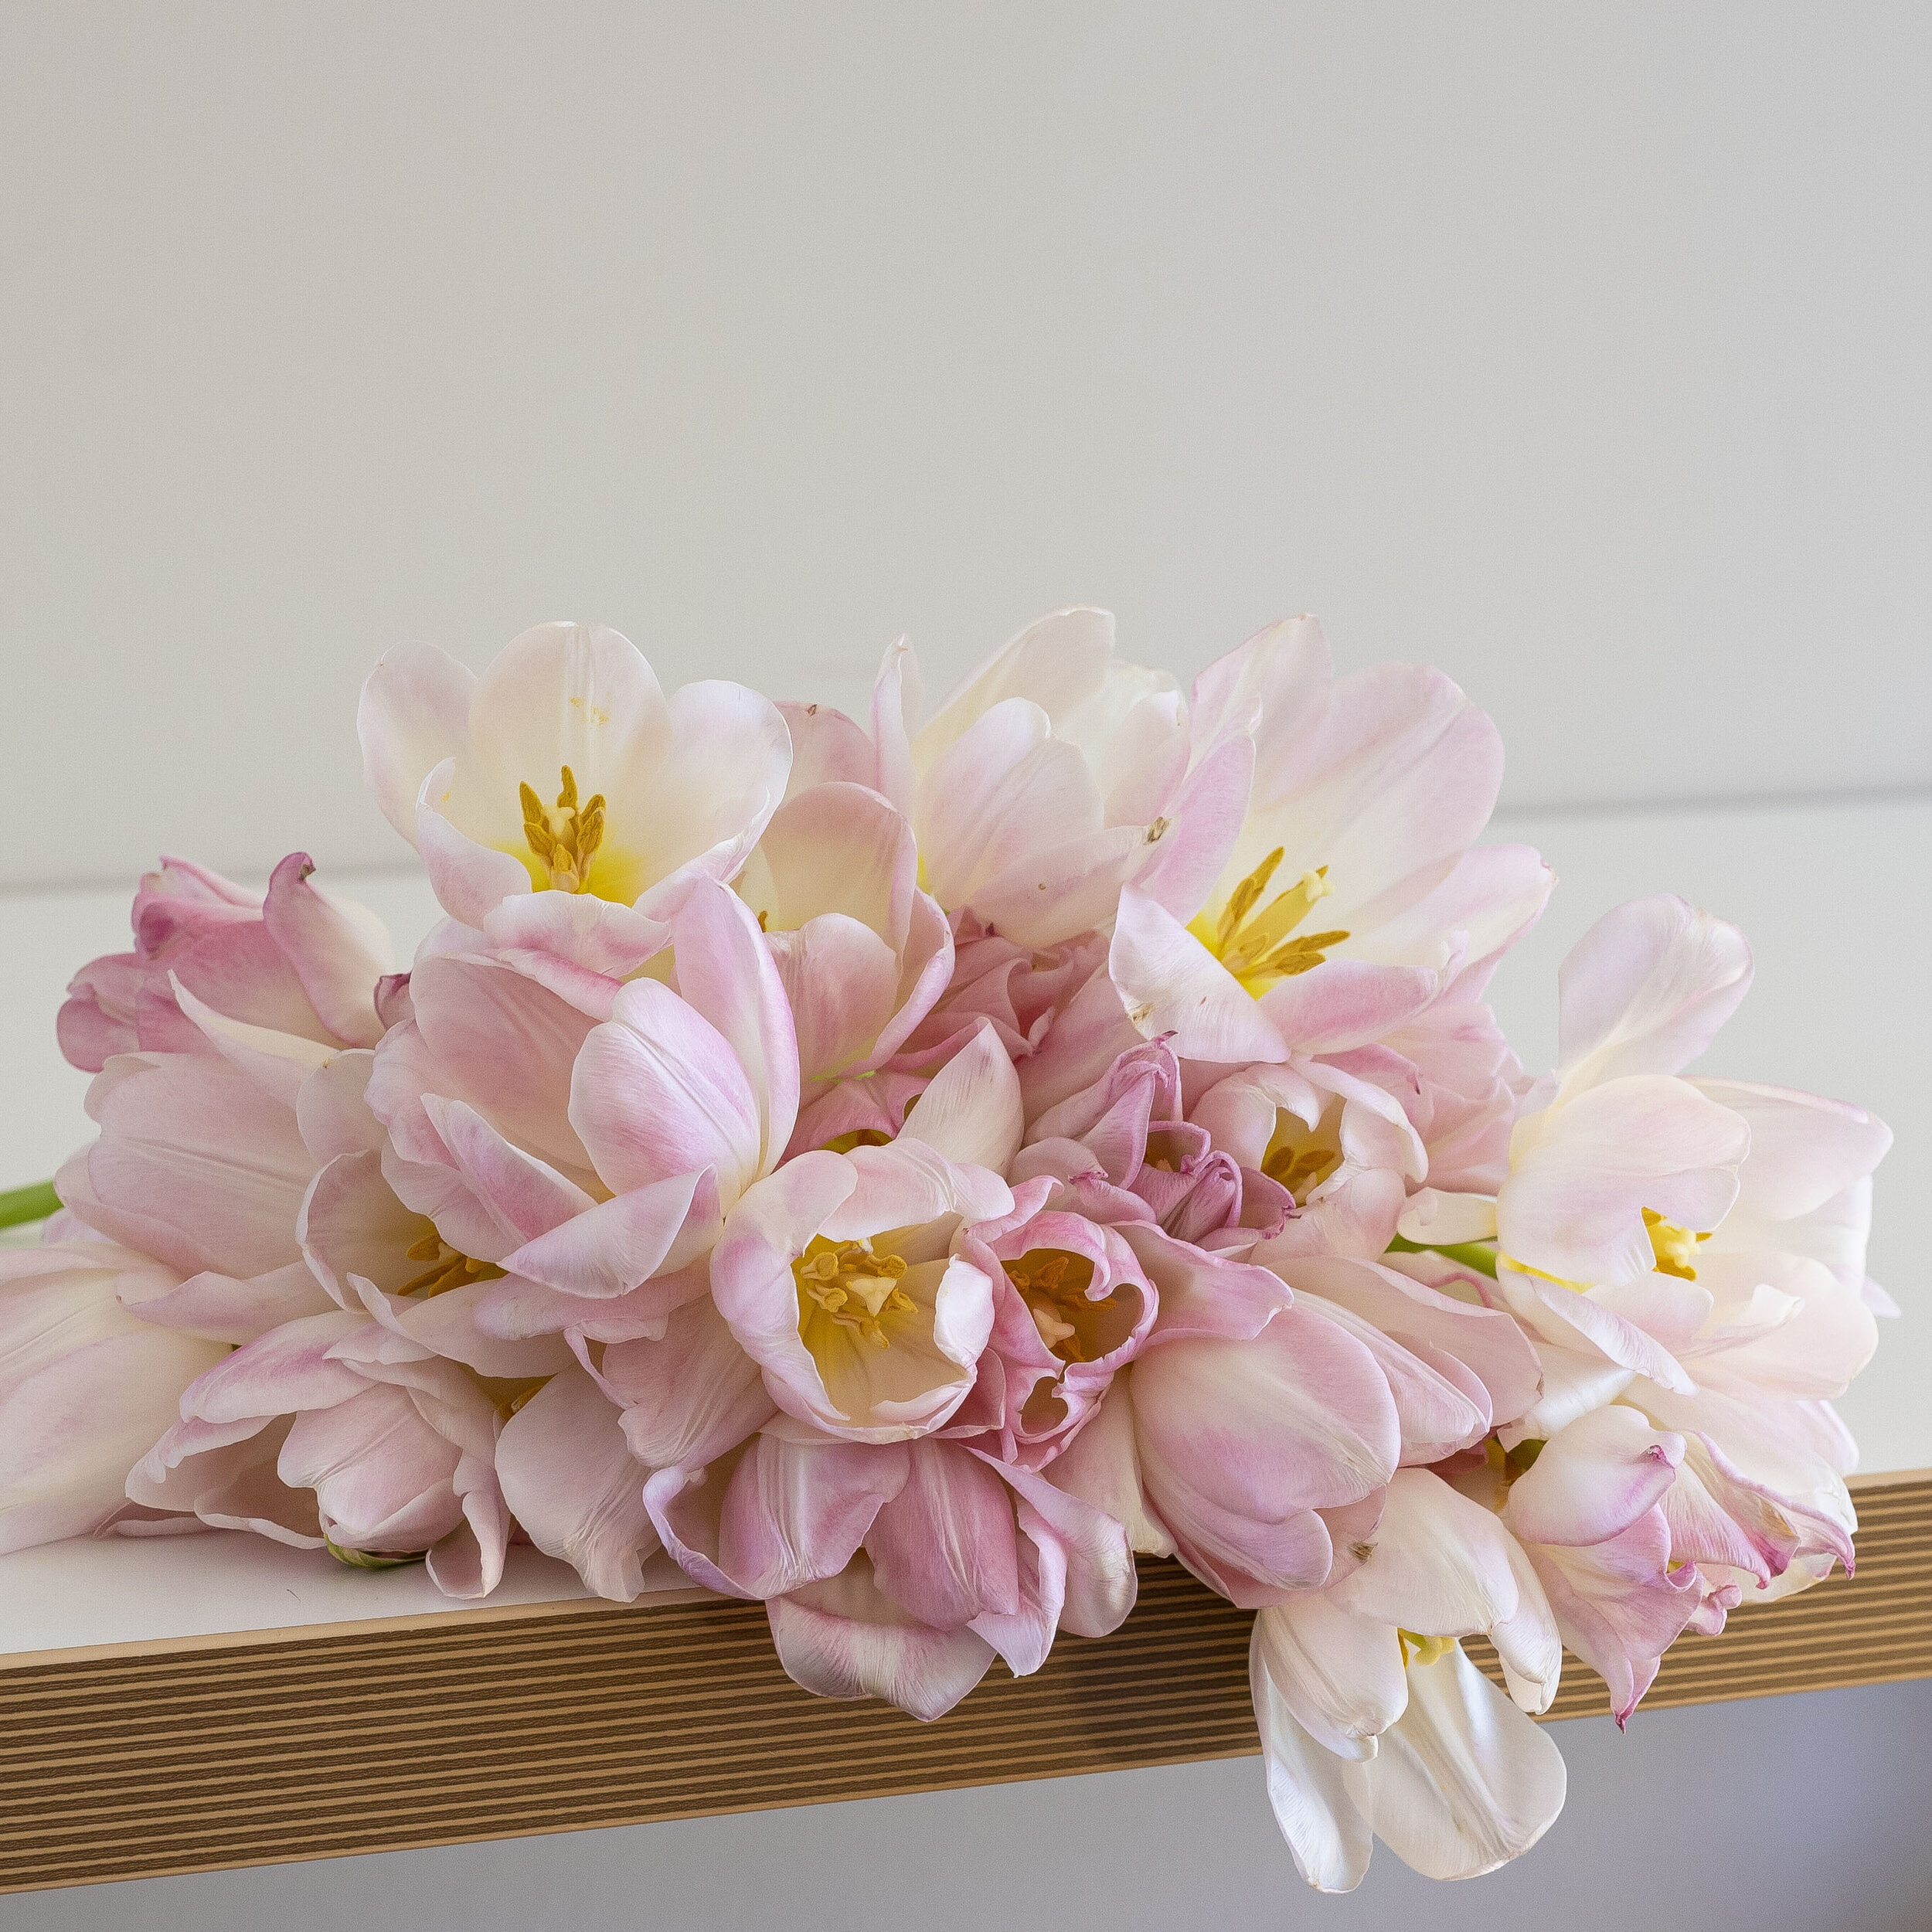 A close up of light pink tulips blooming laying on a table top